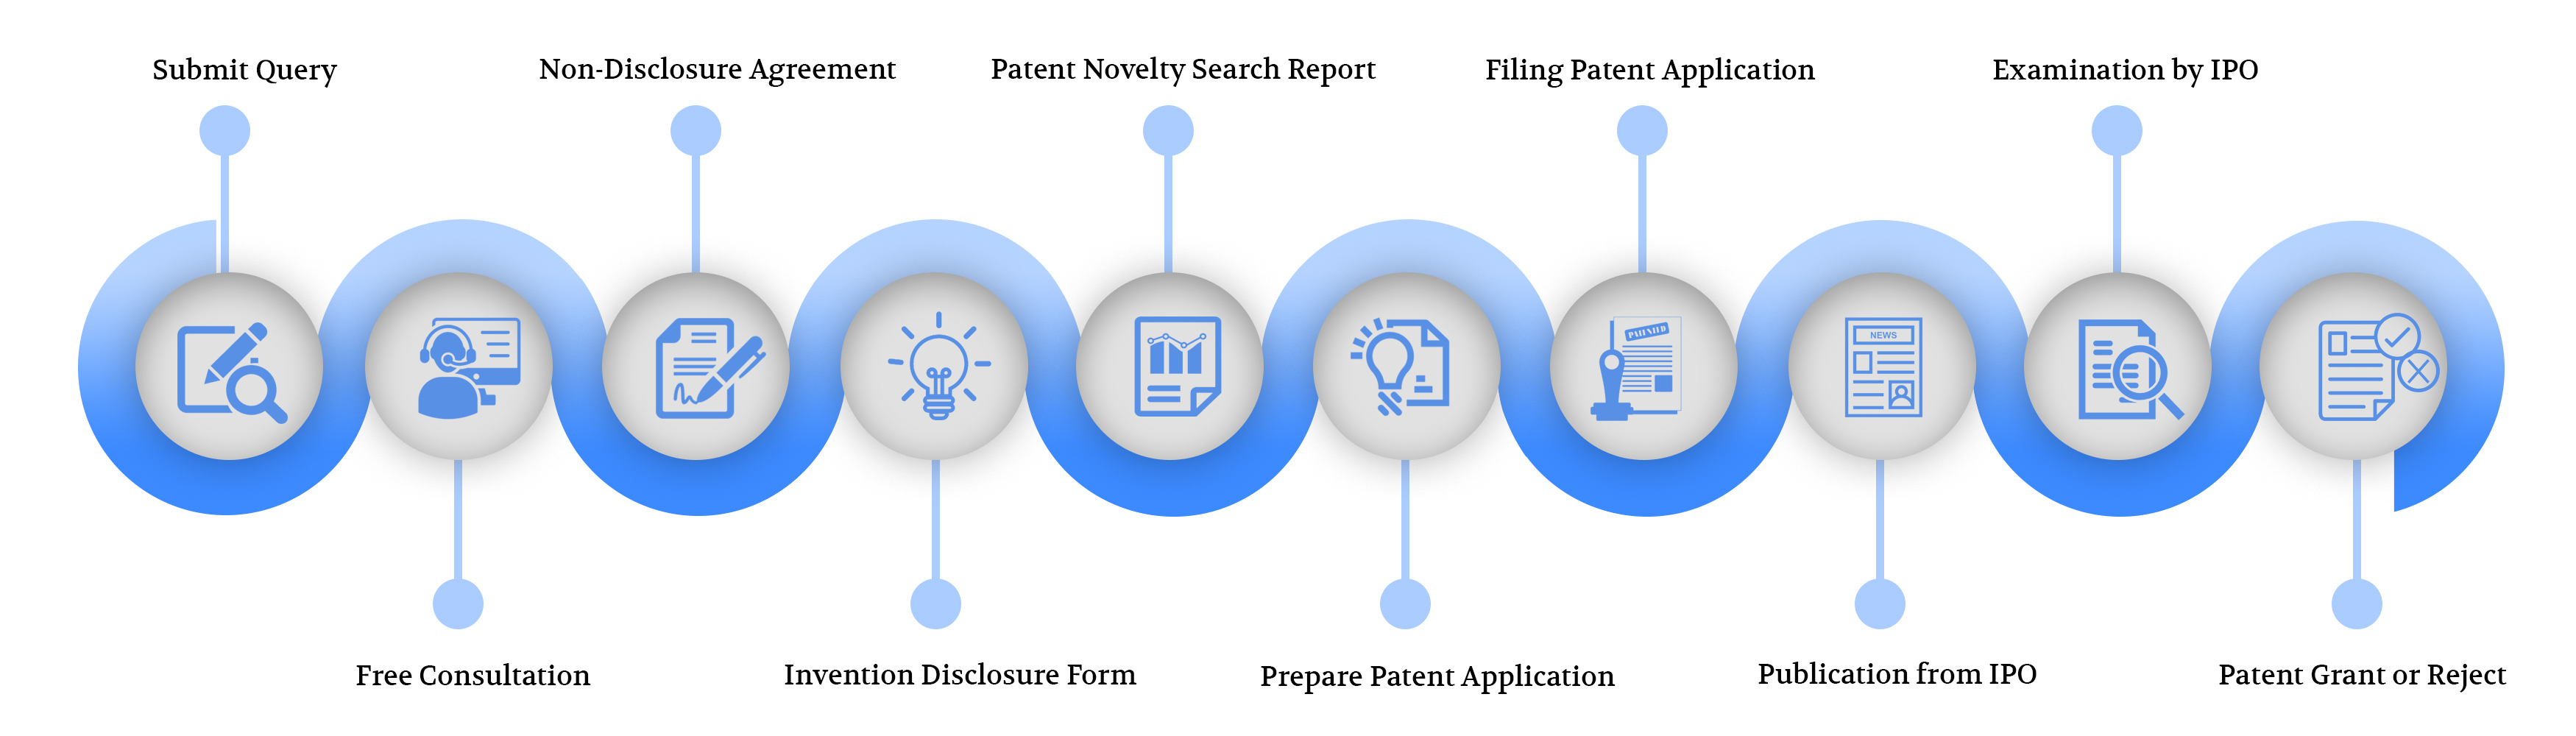 Patent Registration in Bangalore & Patent Registration in Hyderabad- Get experienced registered Patent lawyers for registration of the Patent Application in Bangalore & Hyderabad.